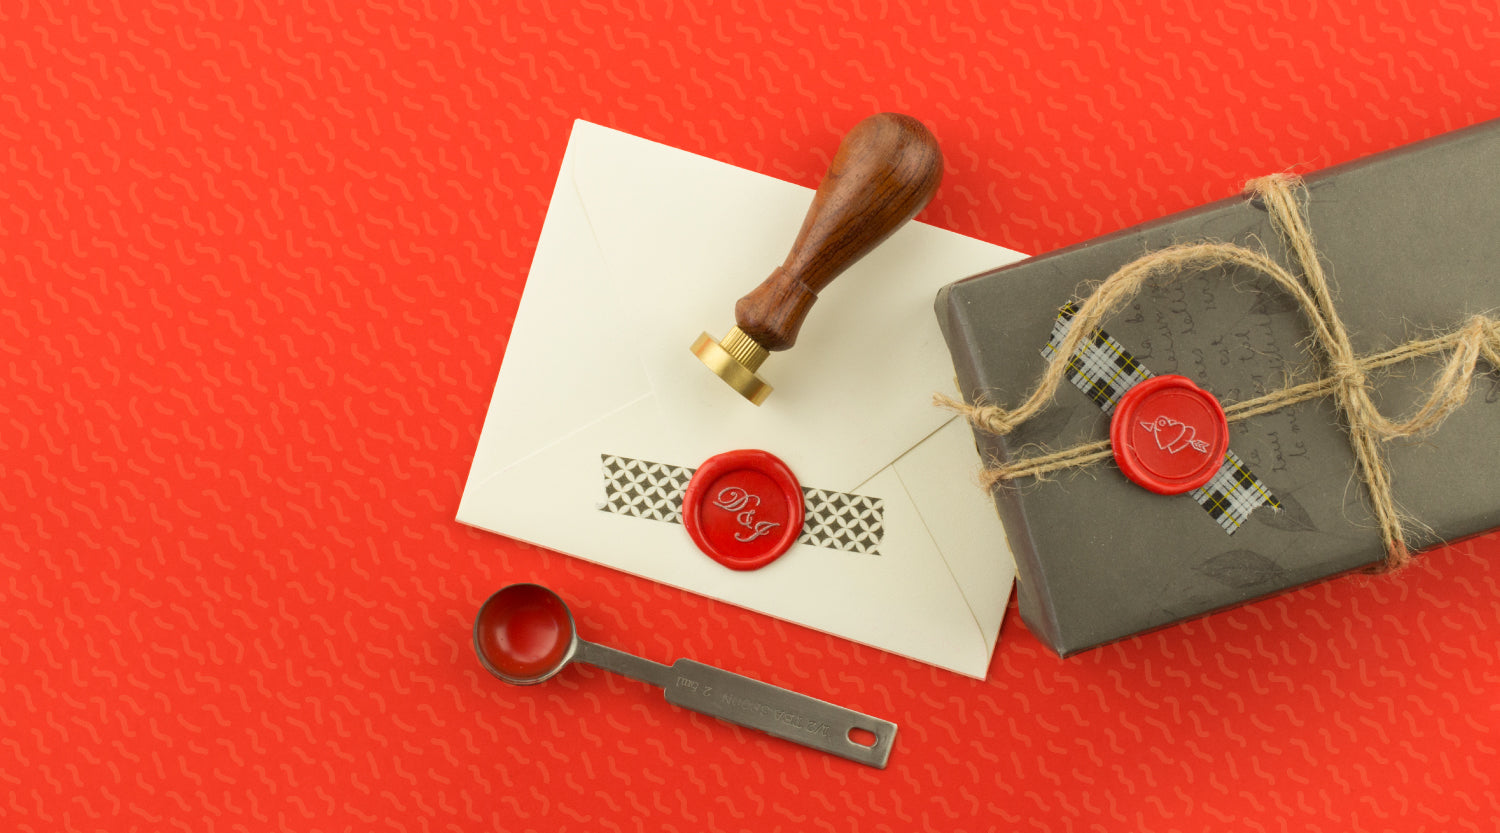 Create a double character wax seal stamp for someone special.